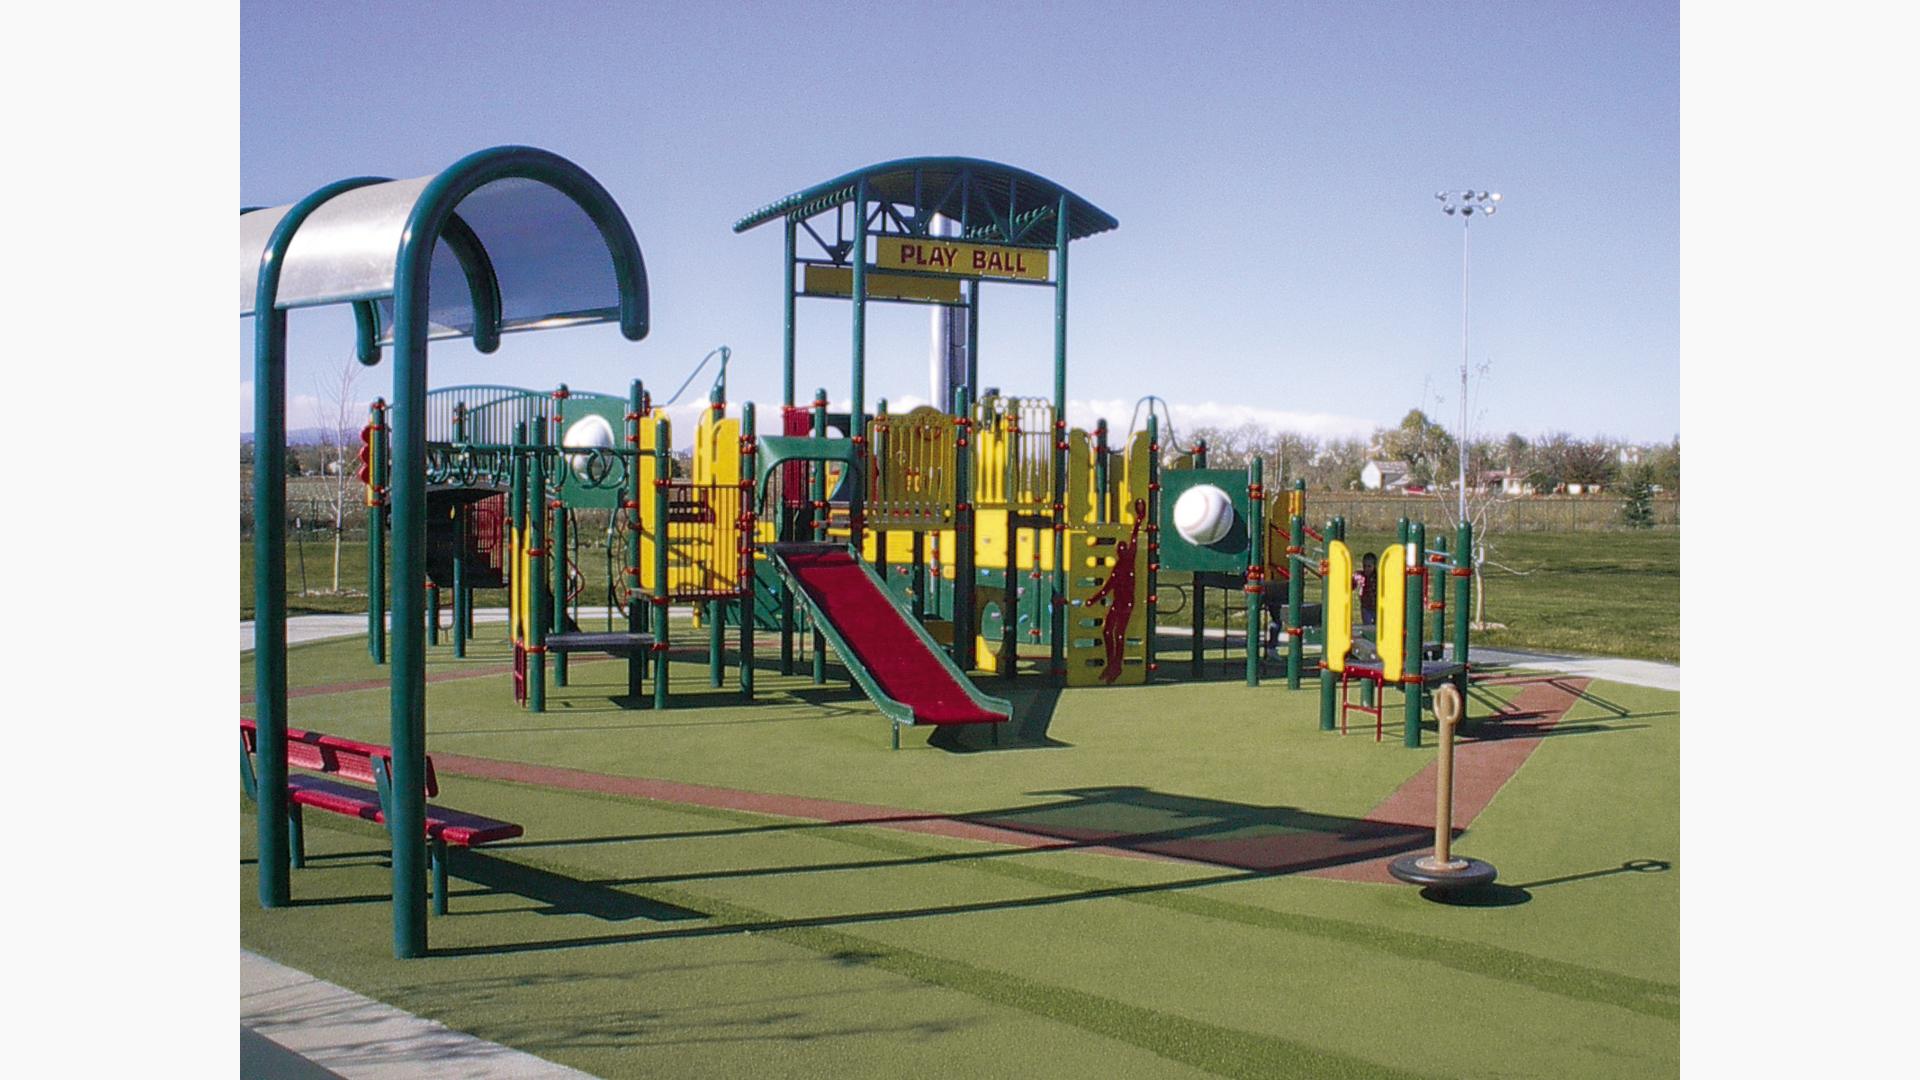 A playground with a color scheme of green, red, and yellow with additional baseball themed designs all at a sports complex. 